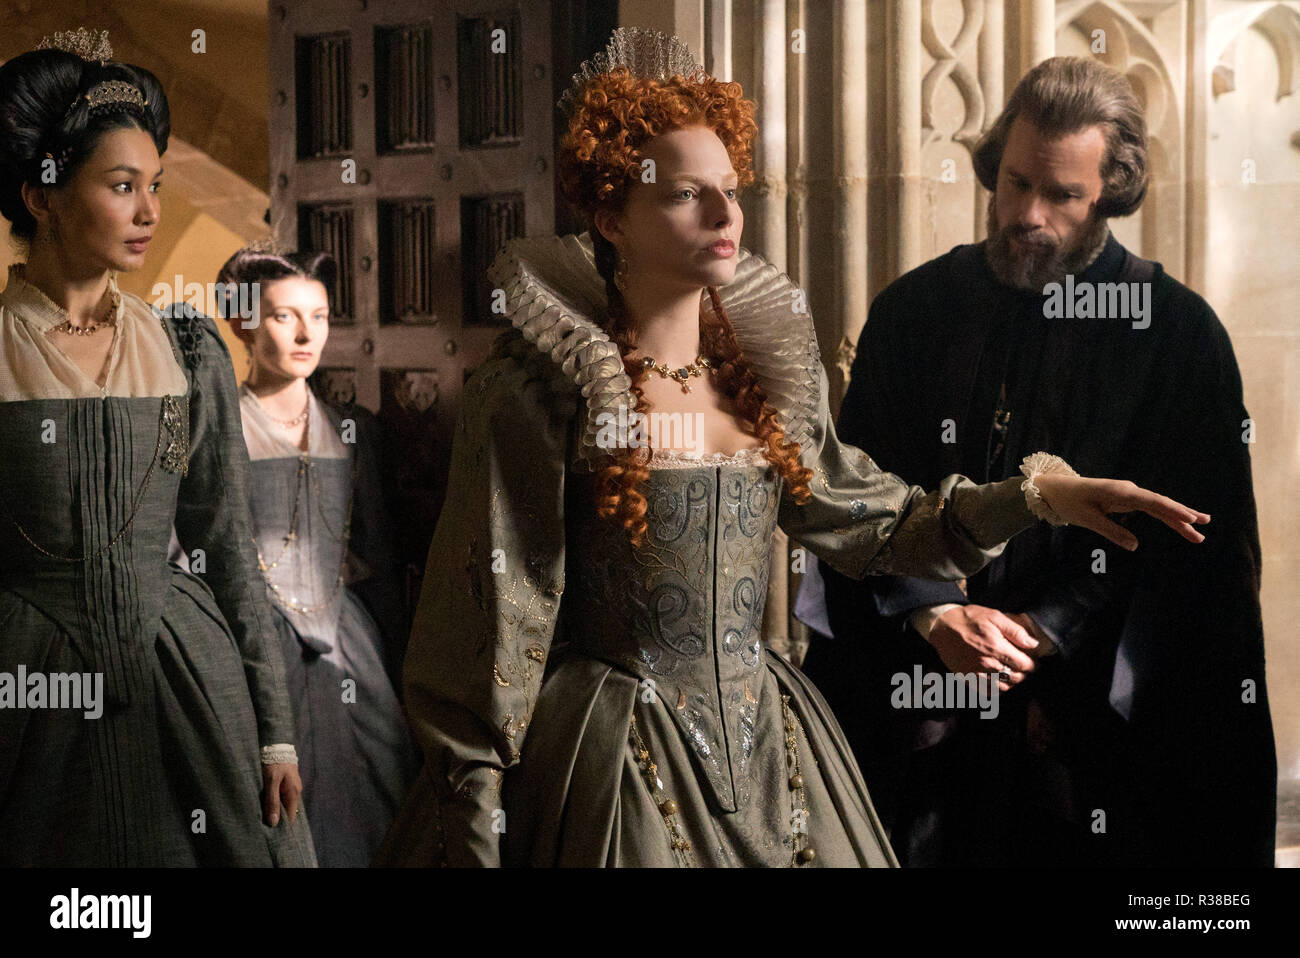 RELEASE DATE: November 2, 2018 TITLE: Mary Queen Of Scots STUDIO: Focus Features DIRECTOR: Josie Rourke PLOT: Mary Stuart's attempt to overthrow her cousin Elizabeth I, Queen of England, finds her condemned to years of imprisonment before facing execution. STARRING: GEMMA CHAN as Bess of Hardwick, GRACE MOLONY as Dorothy Stafford, MARGOT ROBBIE as Queen Elizabeth and GUY PEARCE as William Cecil. (Credit Image: © Focus Features/Entertainment Pictures) Stock Photo